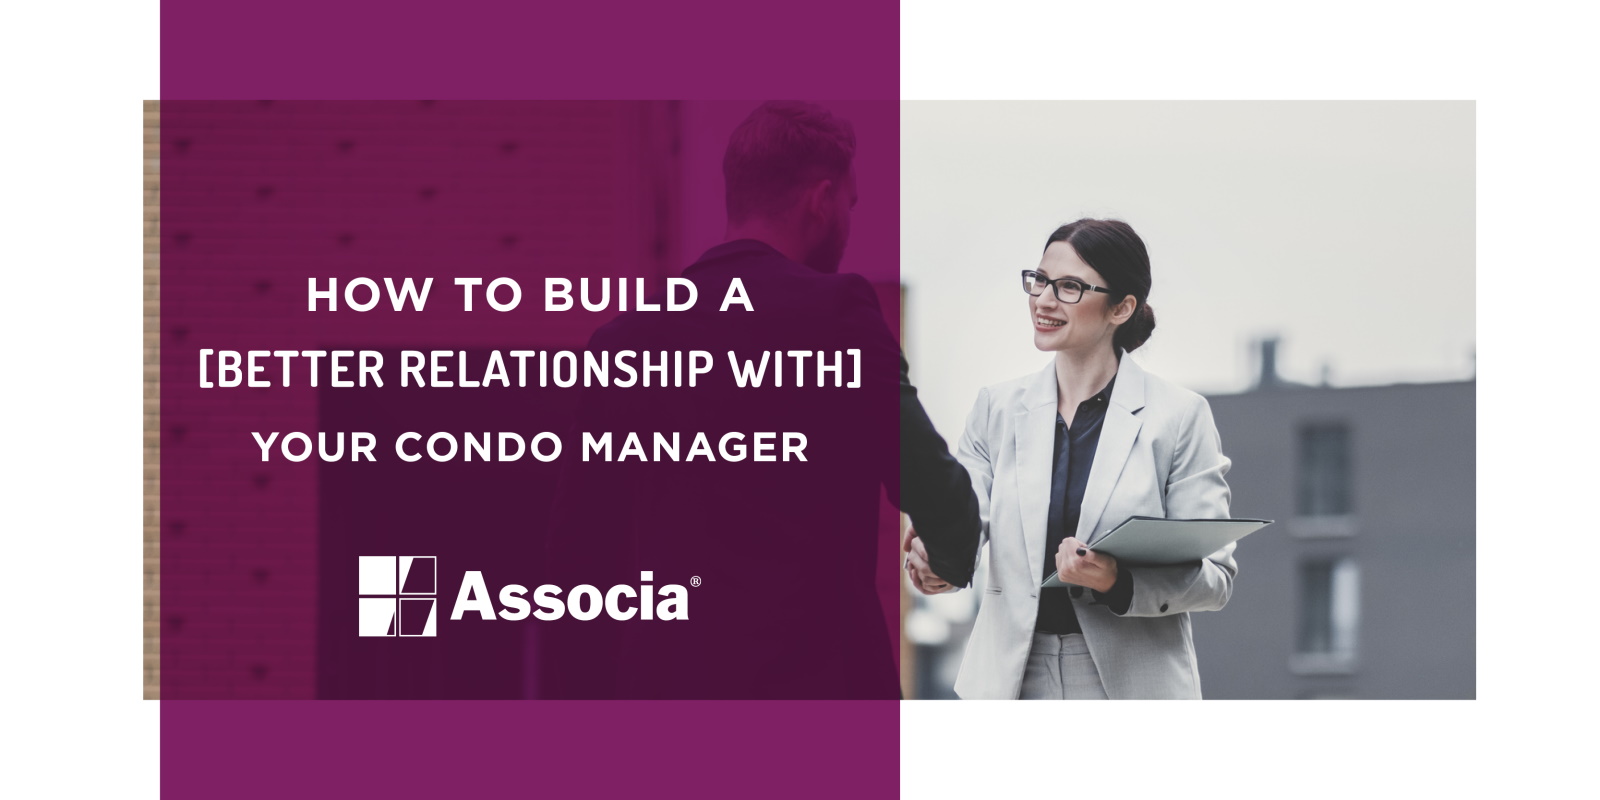 How to Build a Better Relationship with Your Condo Manager